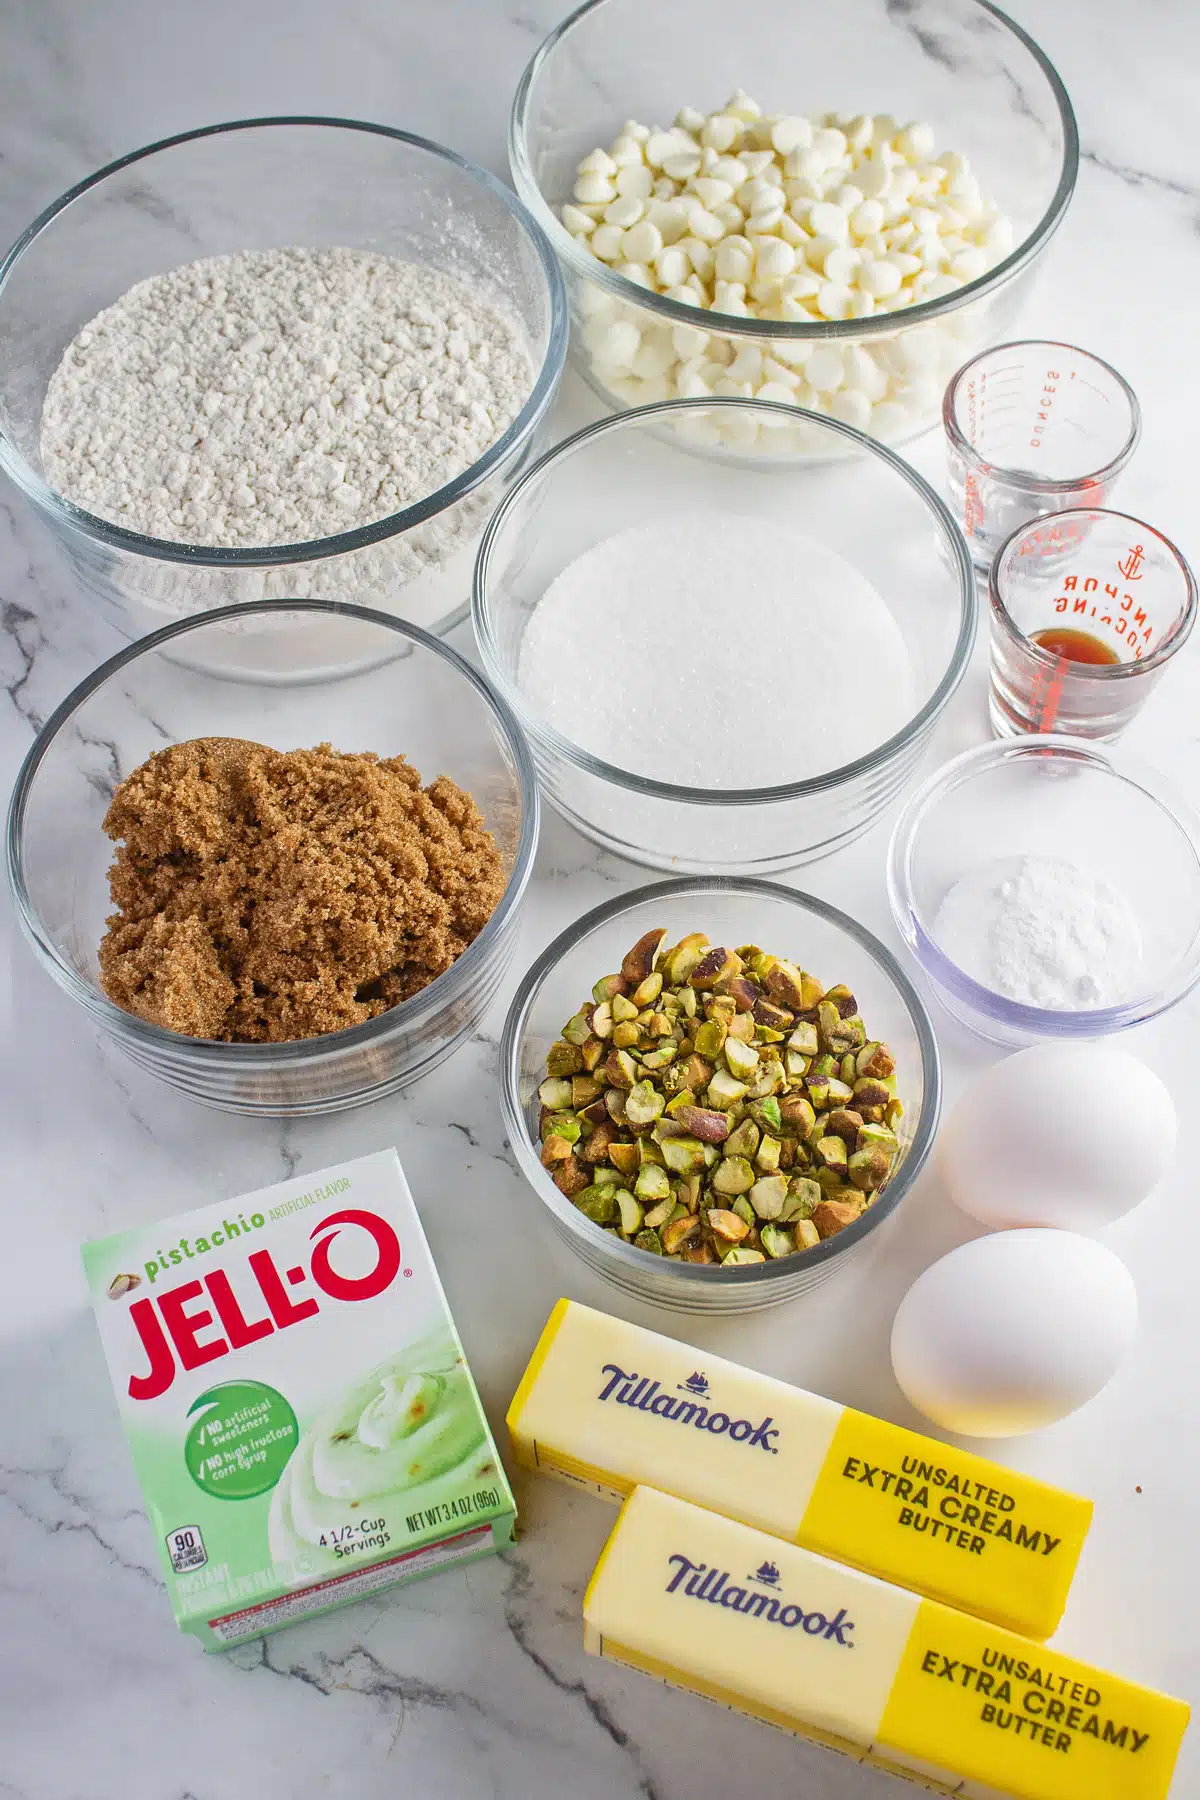 Pistachio pudding mix cookies ingredients measured out and ready to mix and bake.